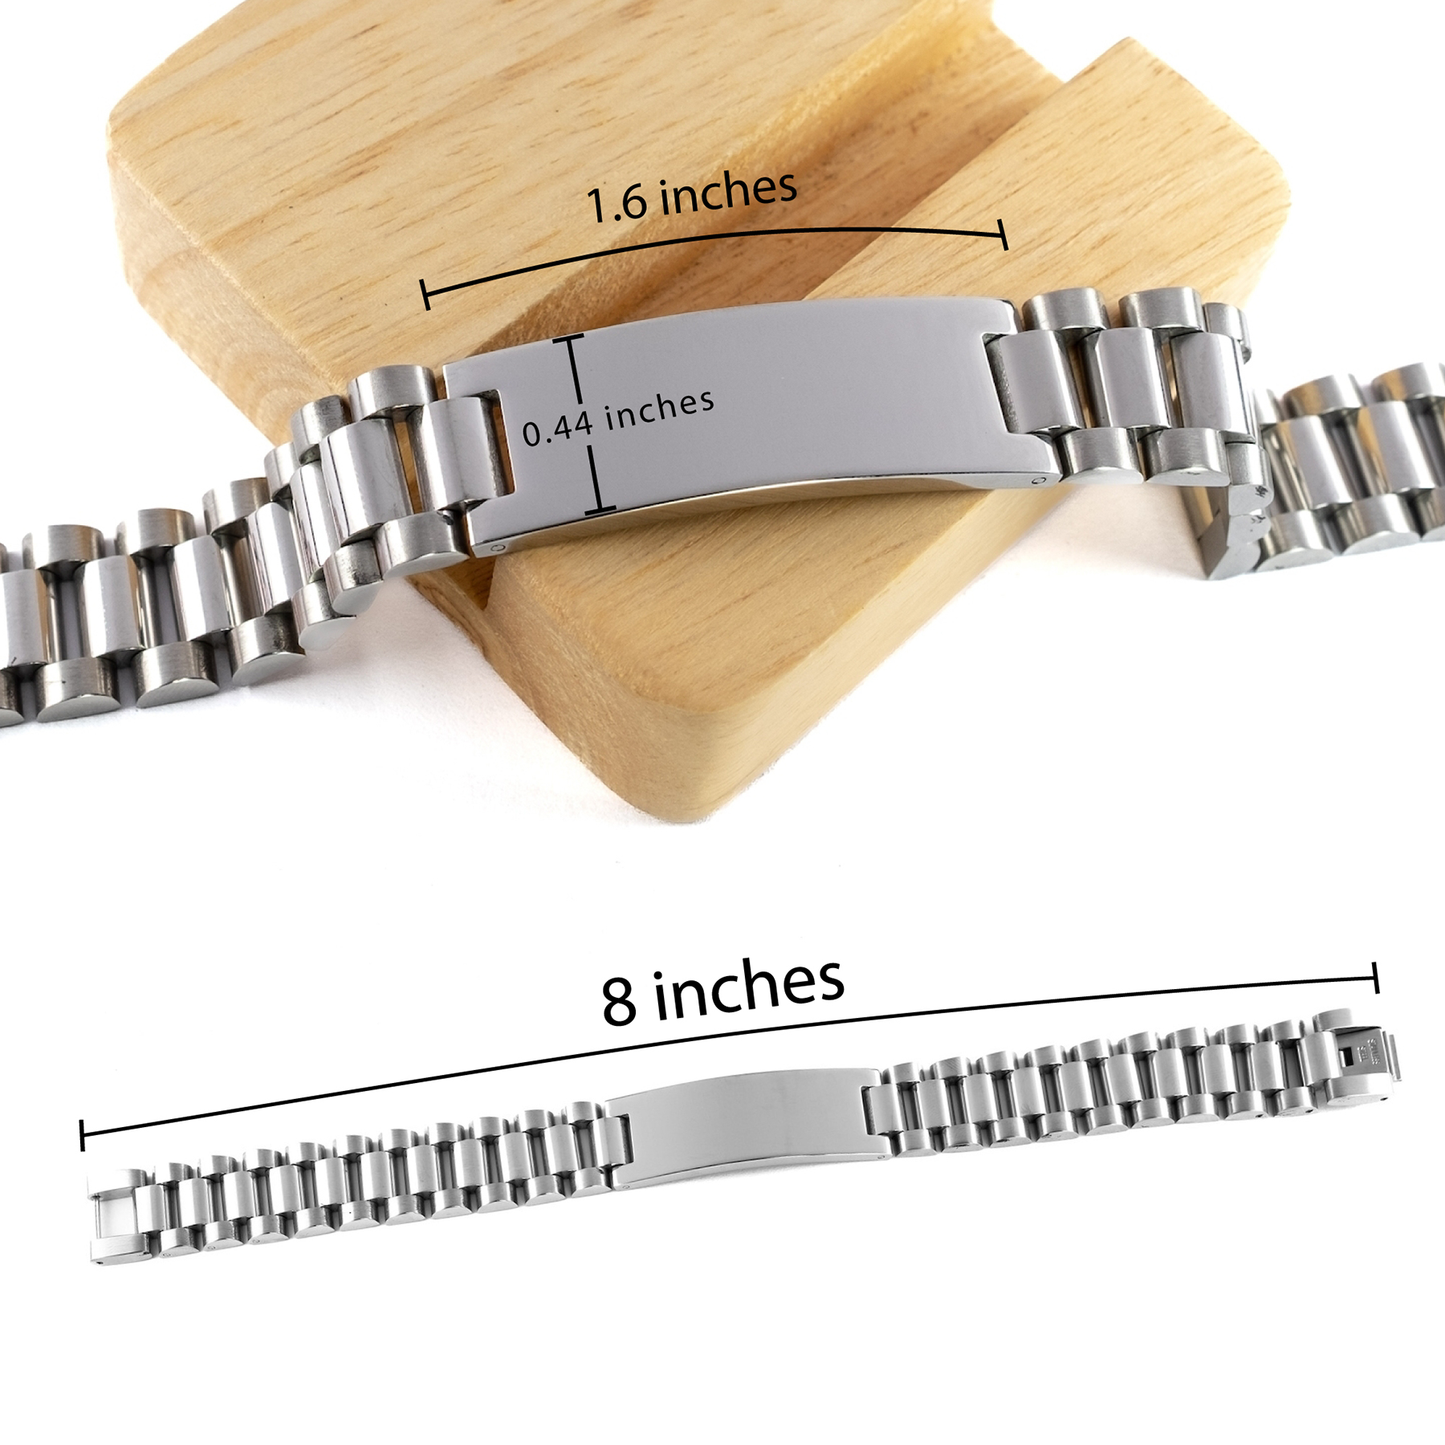 Engraved Ladder Stainless Steel Bracelet for Grampy - Youre Always in My Heart - Perfect Gift for Christmas, Birthday, and Veterans Day